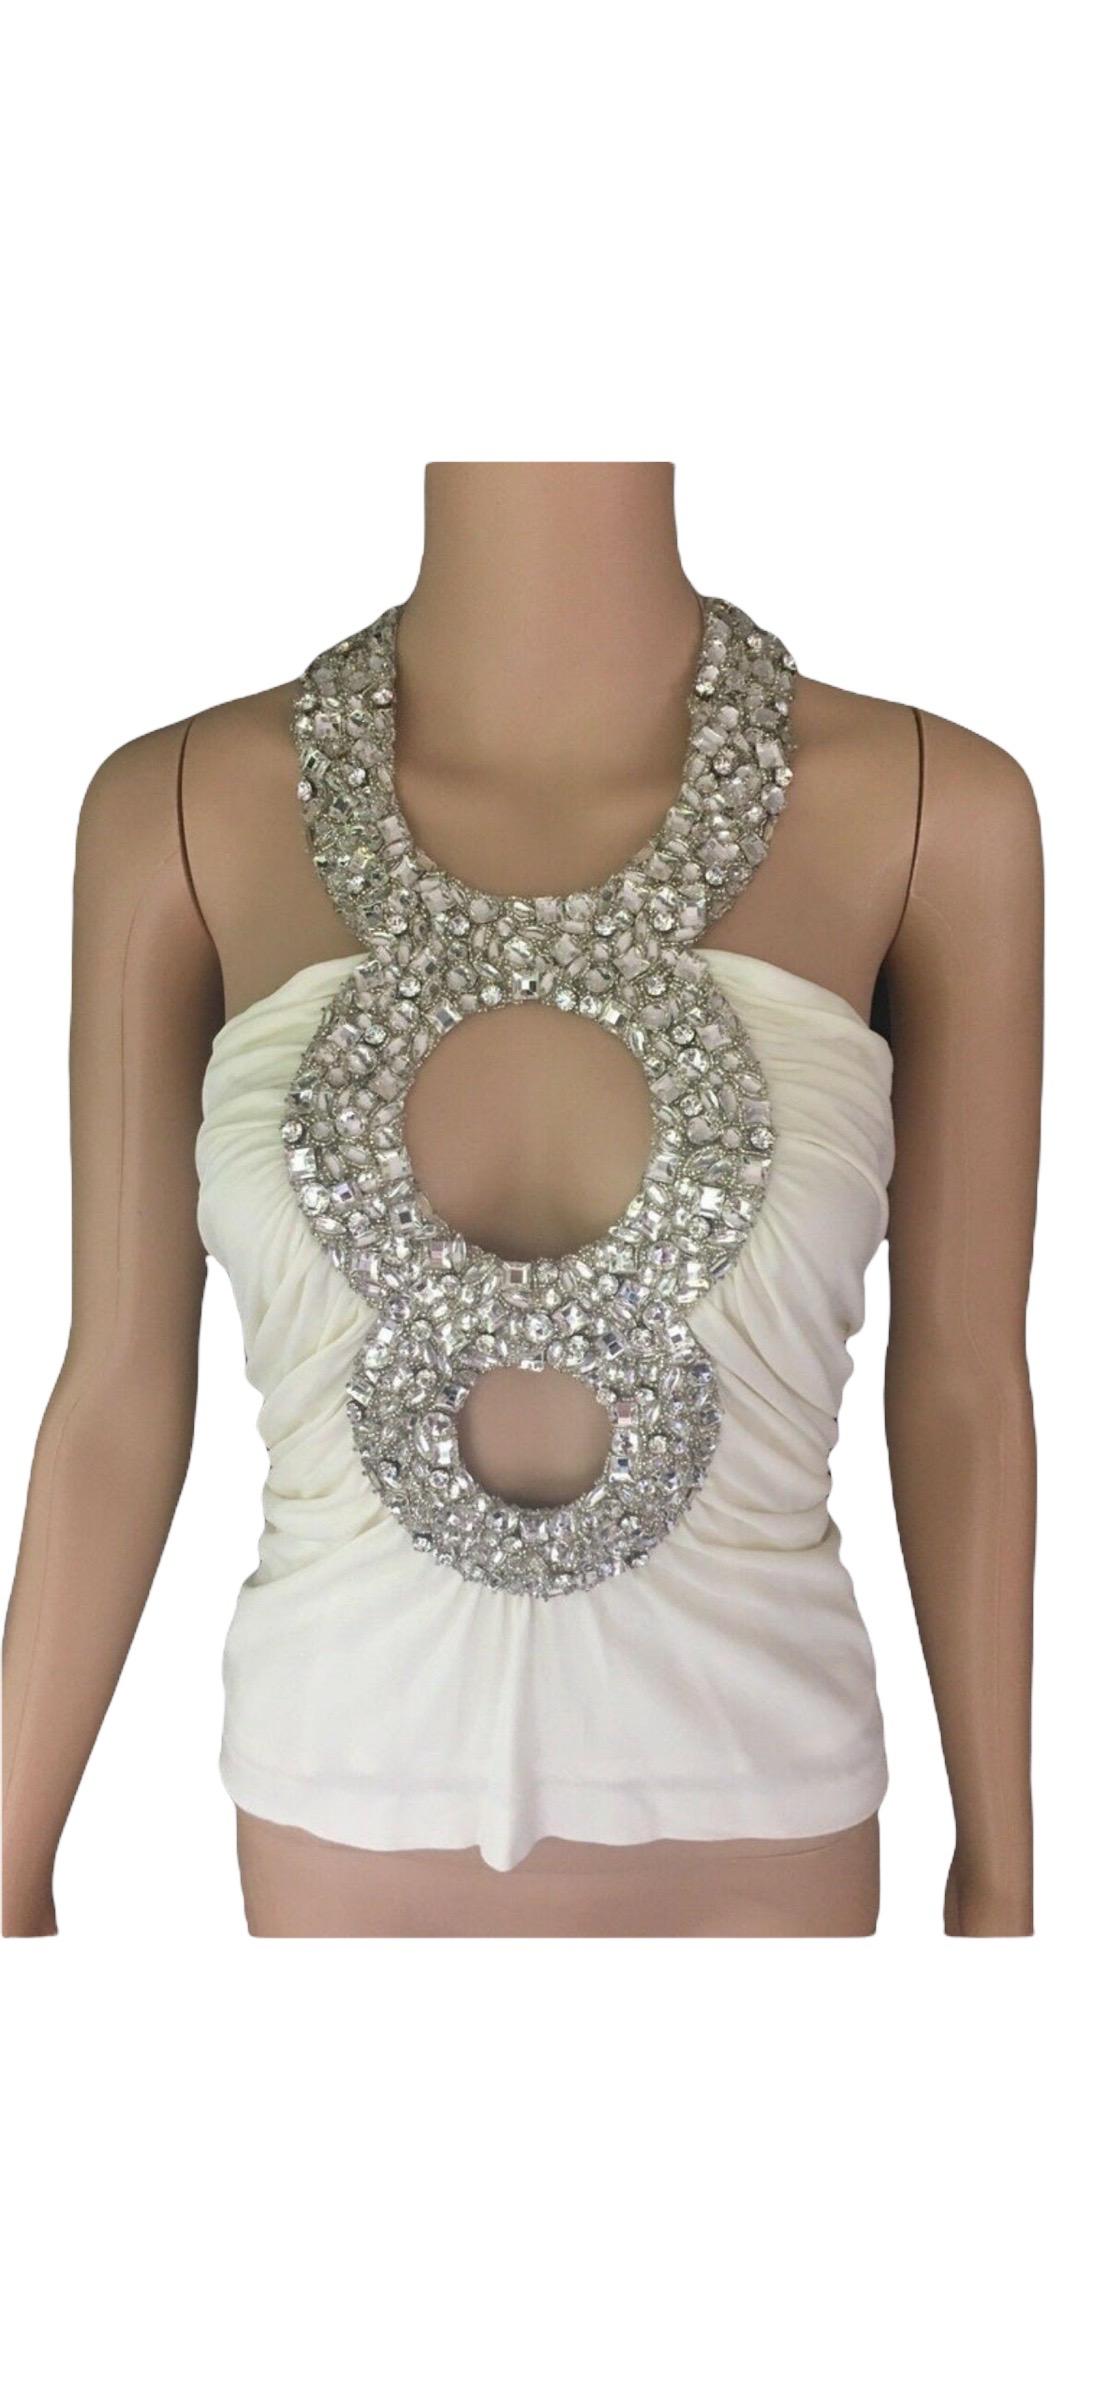 Women's Azzaro Couture Iconic Crystal Embellished Cutout White Top 